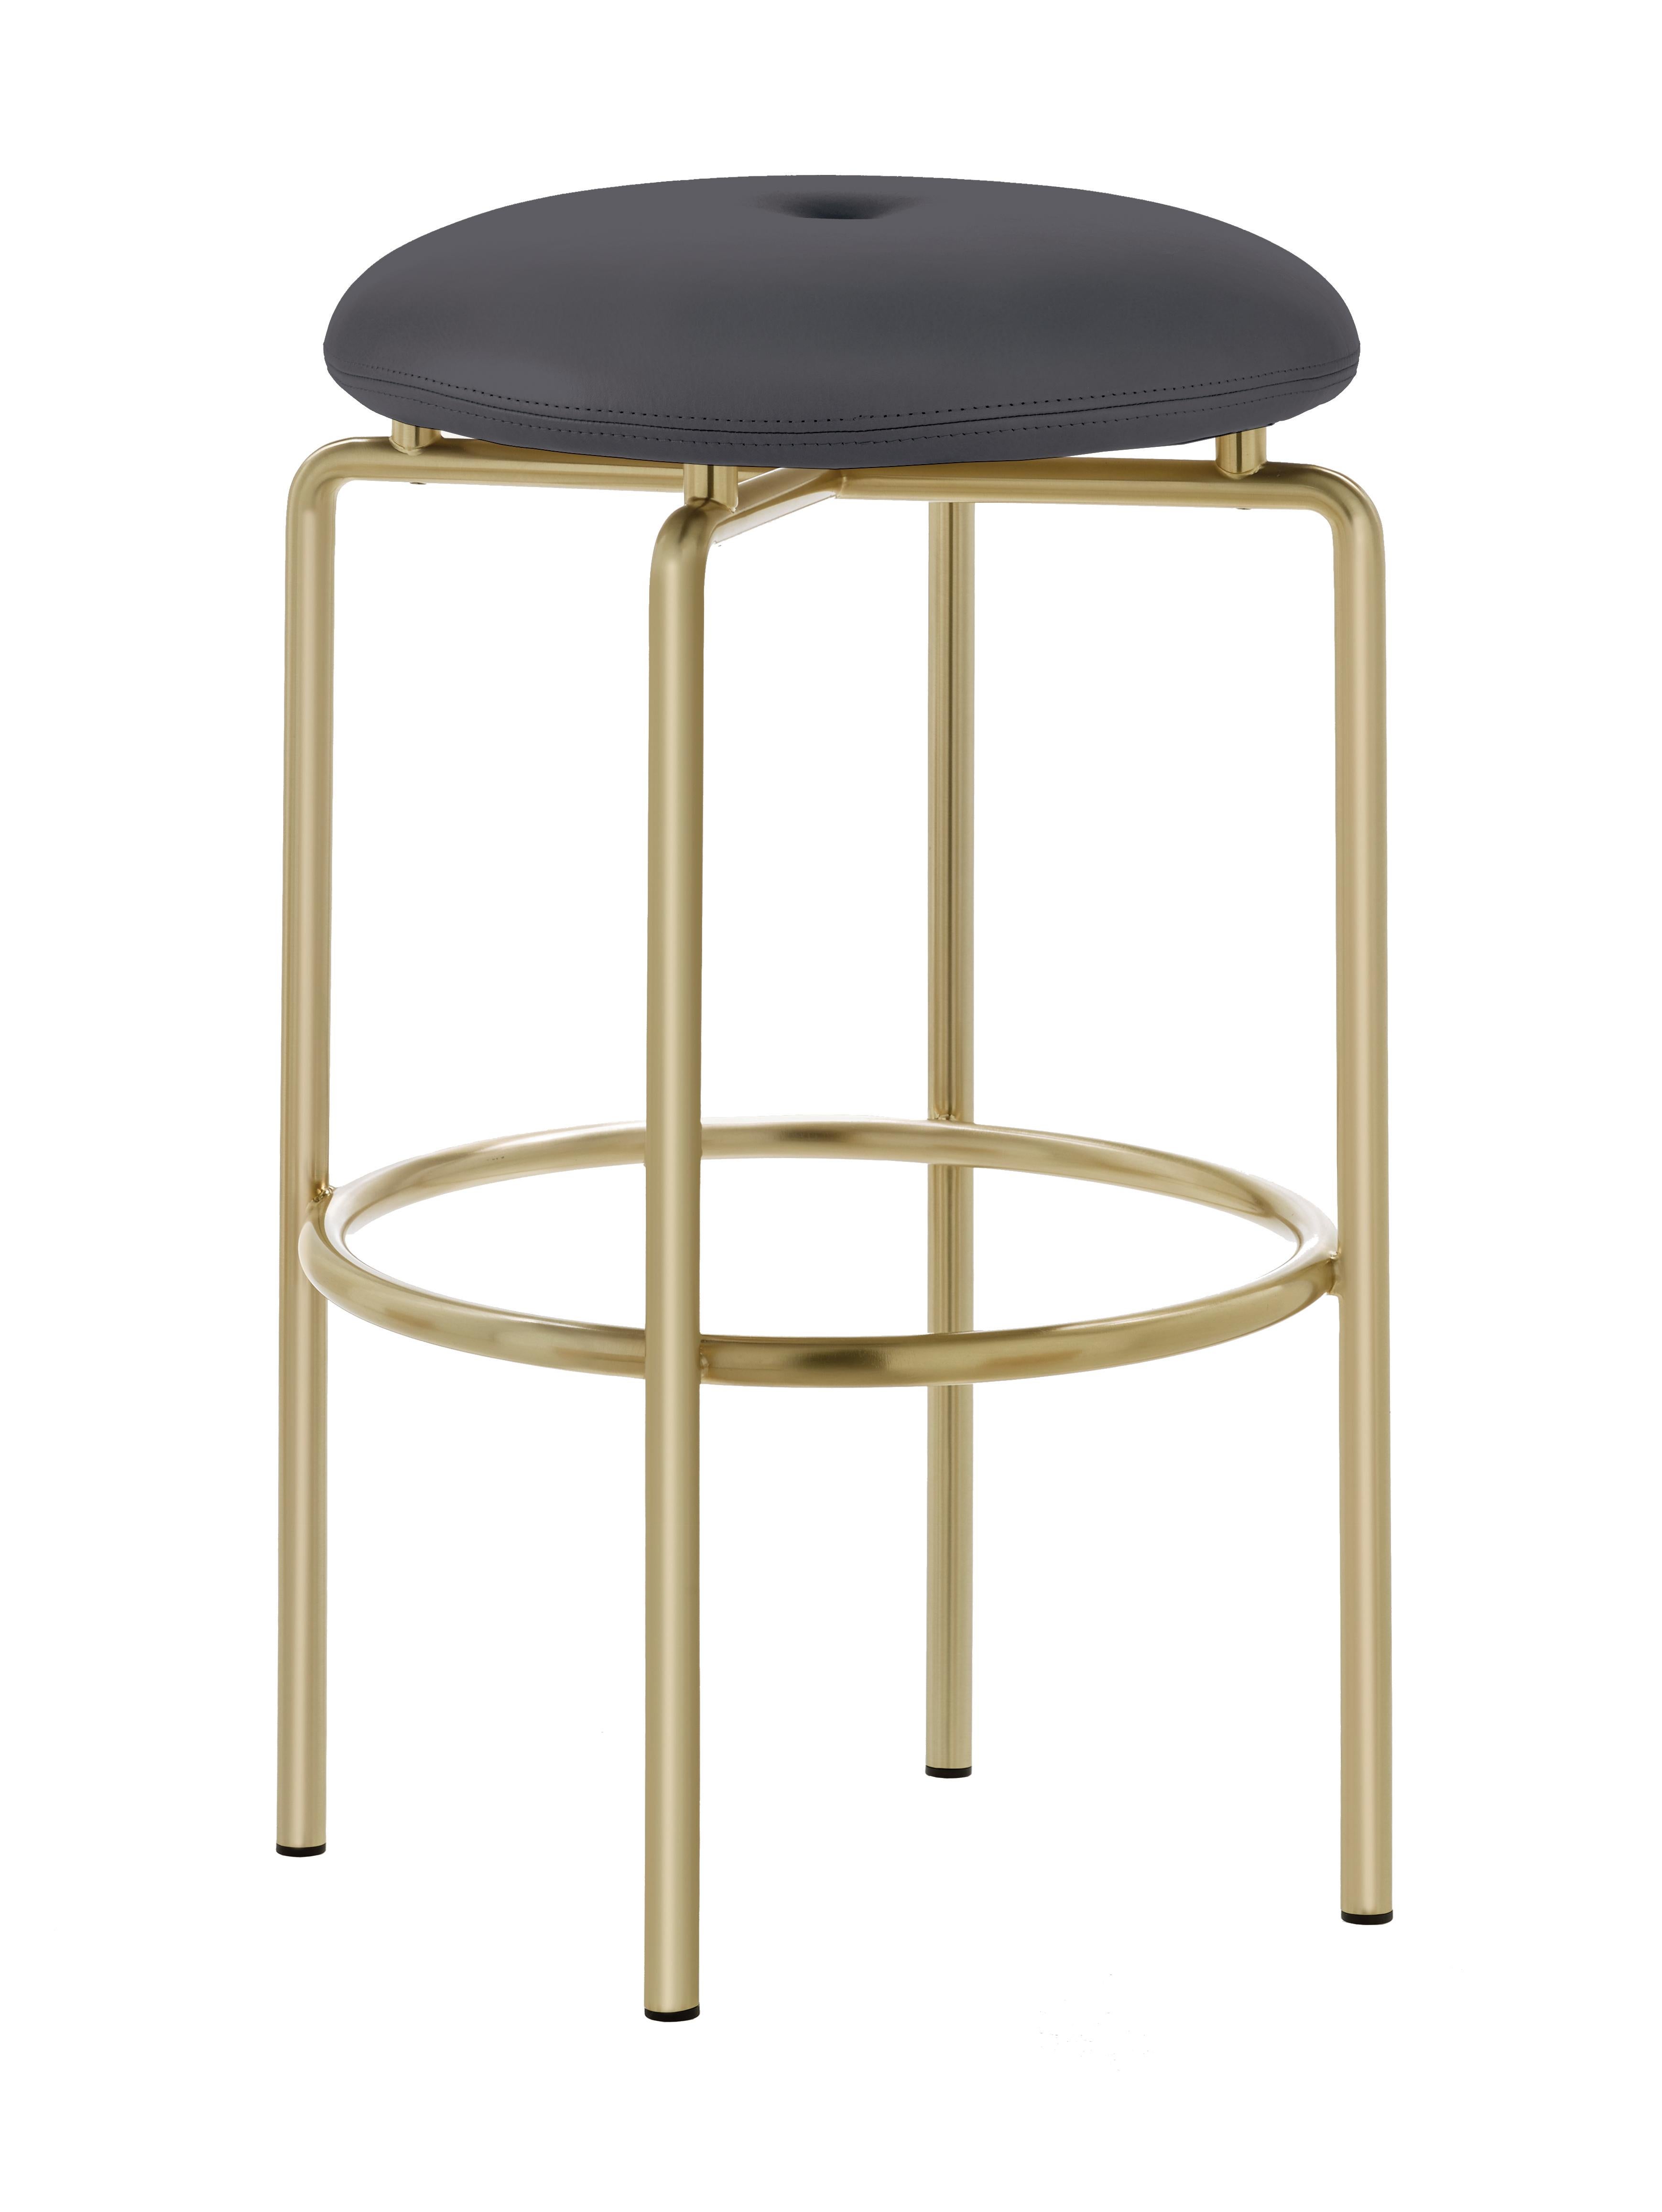 For Sale: Black (Elegant 91059 Anthracite) Circular Counter Stool in Satin Brass and Leather Designed by Craig Bassam